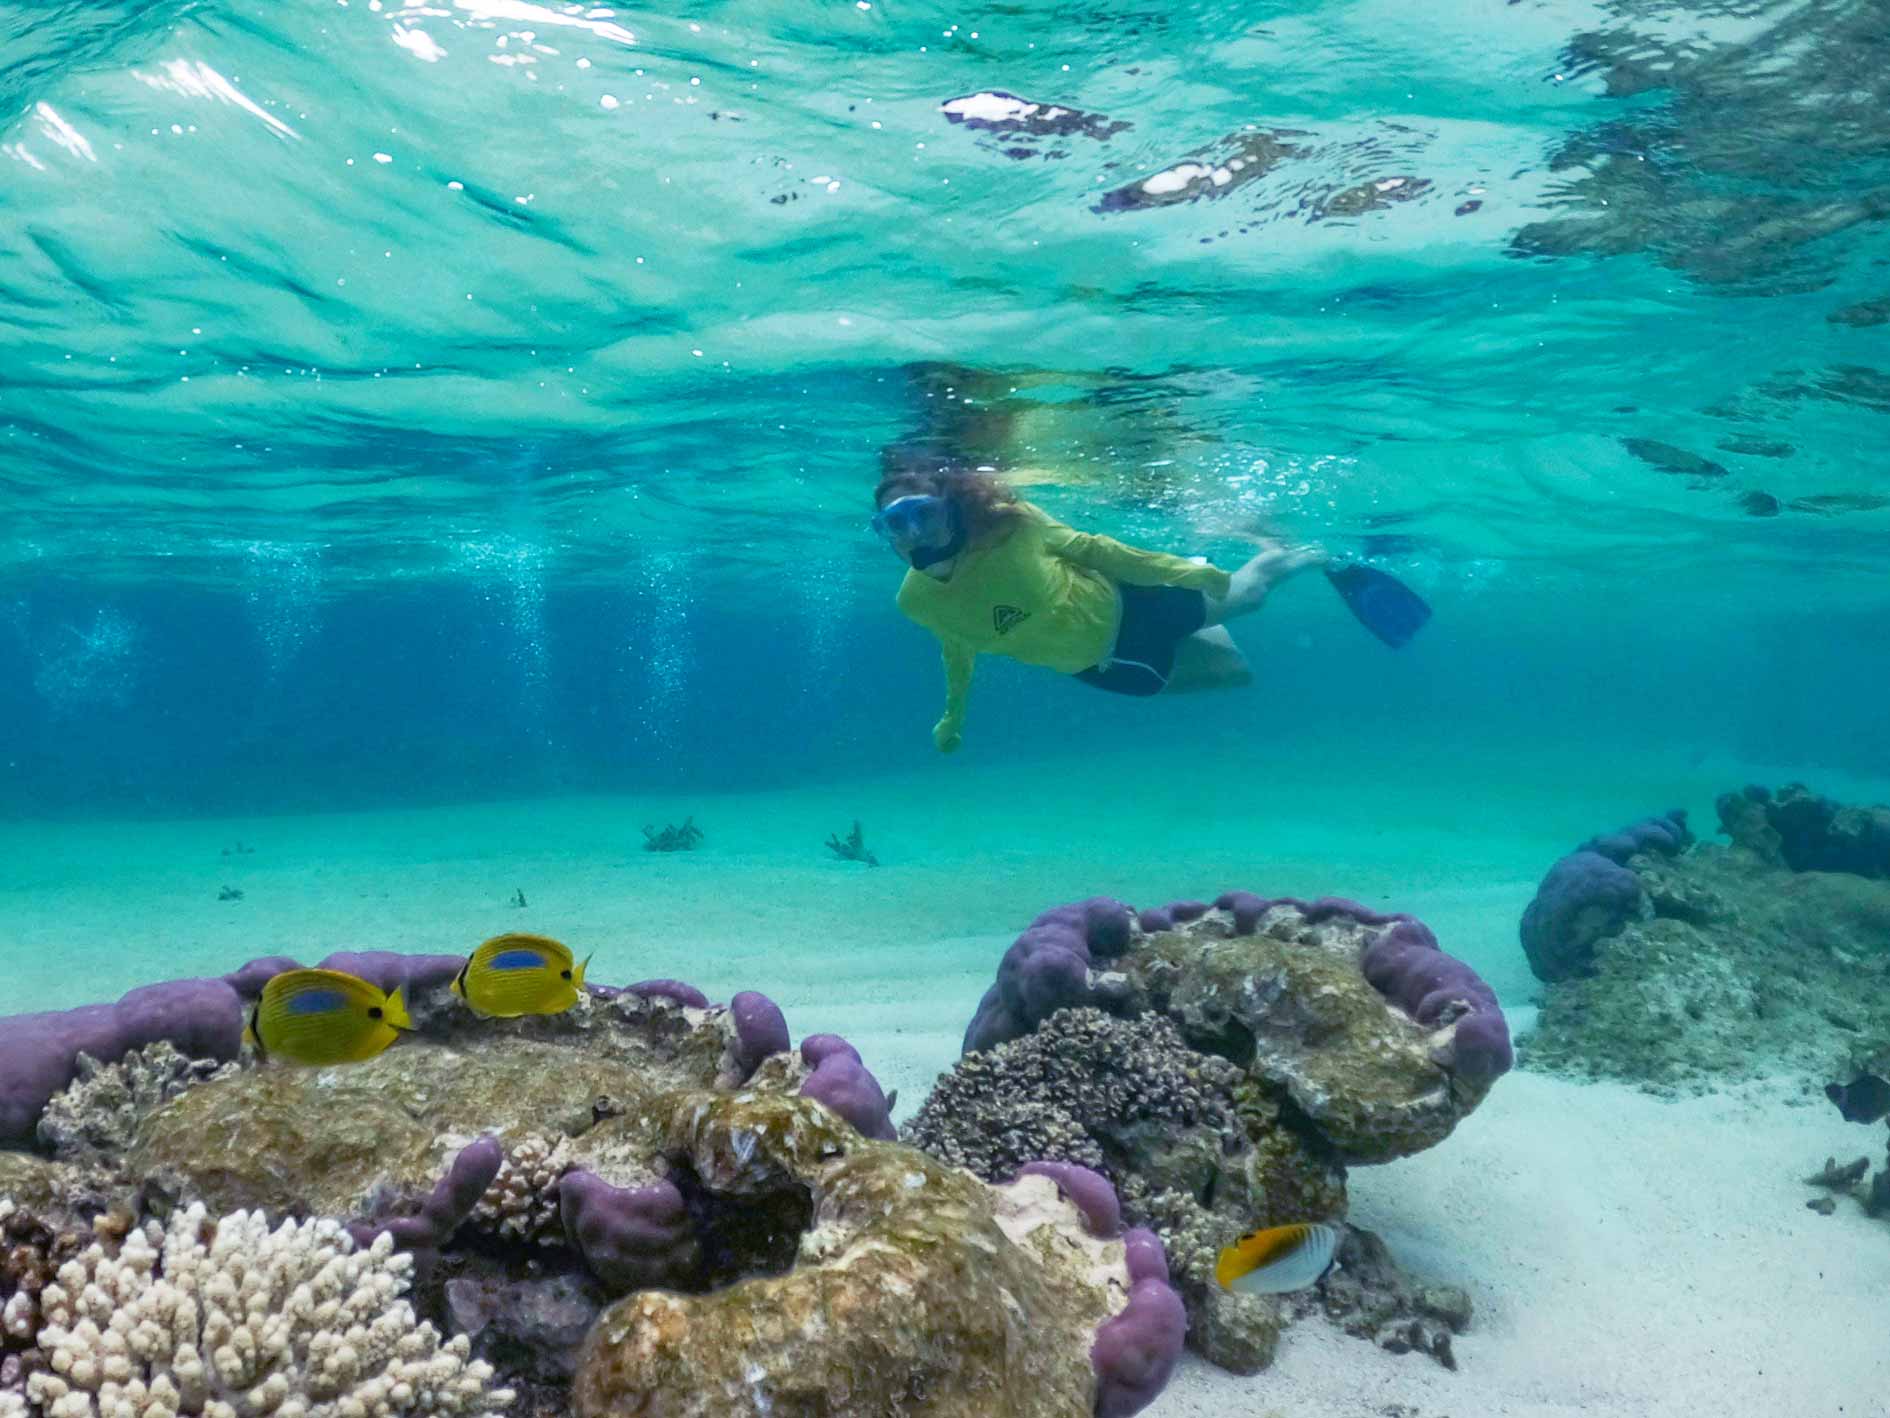 Lady snorkelling over coral in shallow water on Coral by Kayak tour